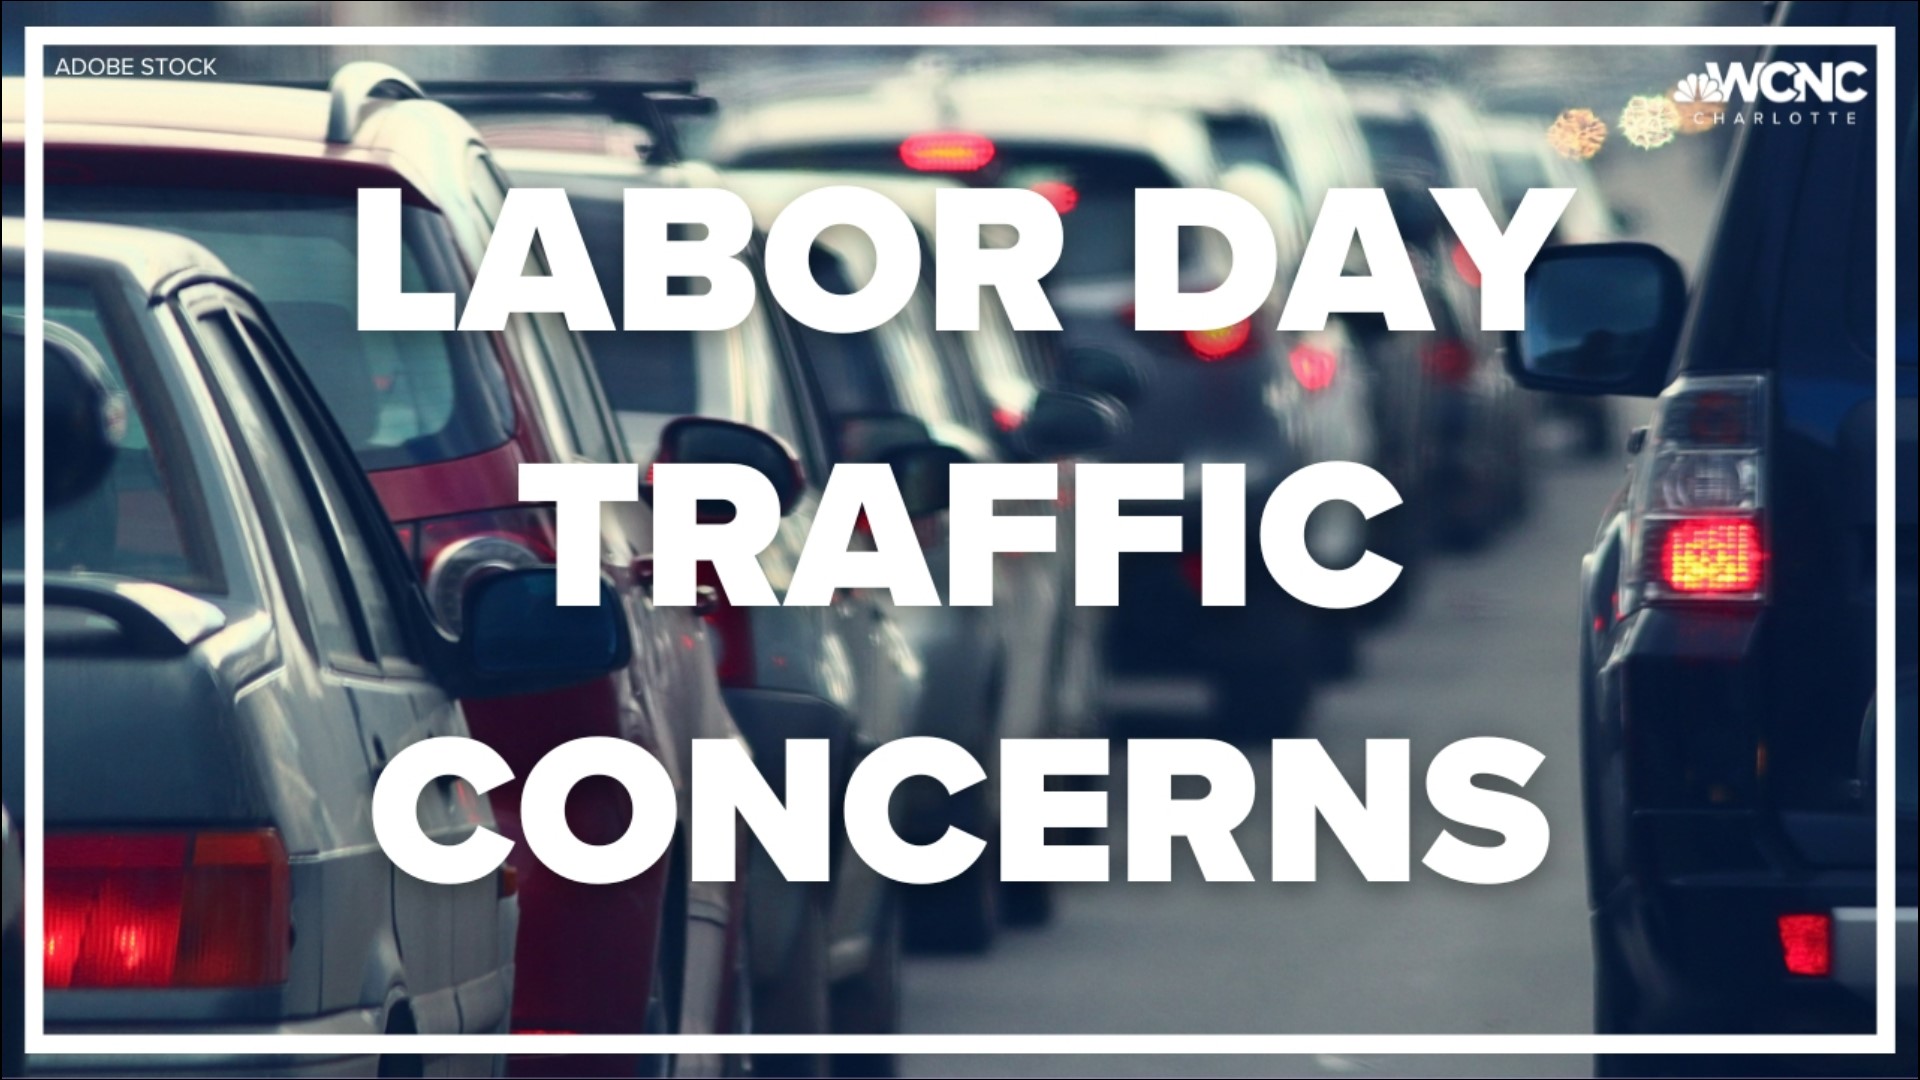 Labor Day travel can come with some risks if you're not properly prepared.